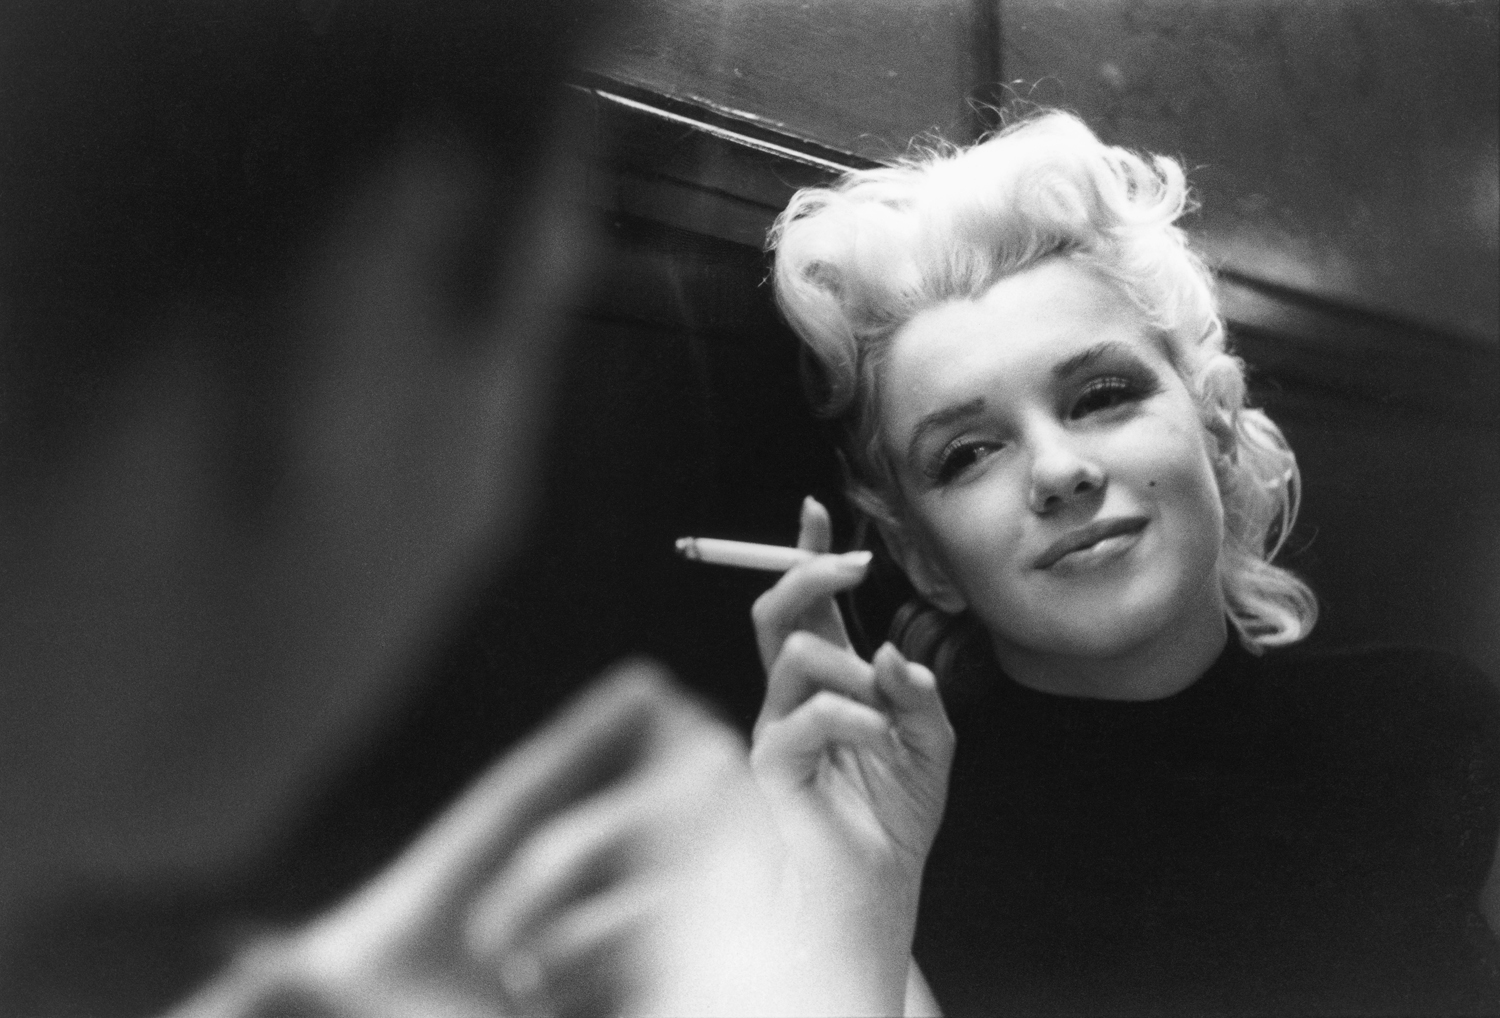 Monroe has a smoke while relaxing in New York City.